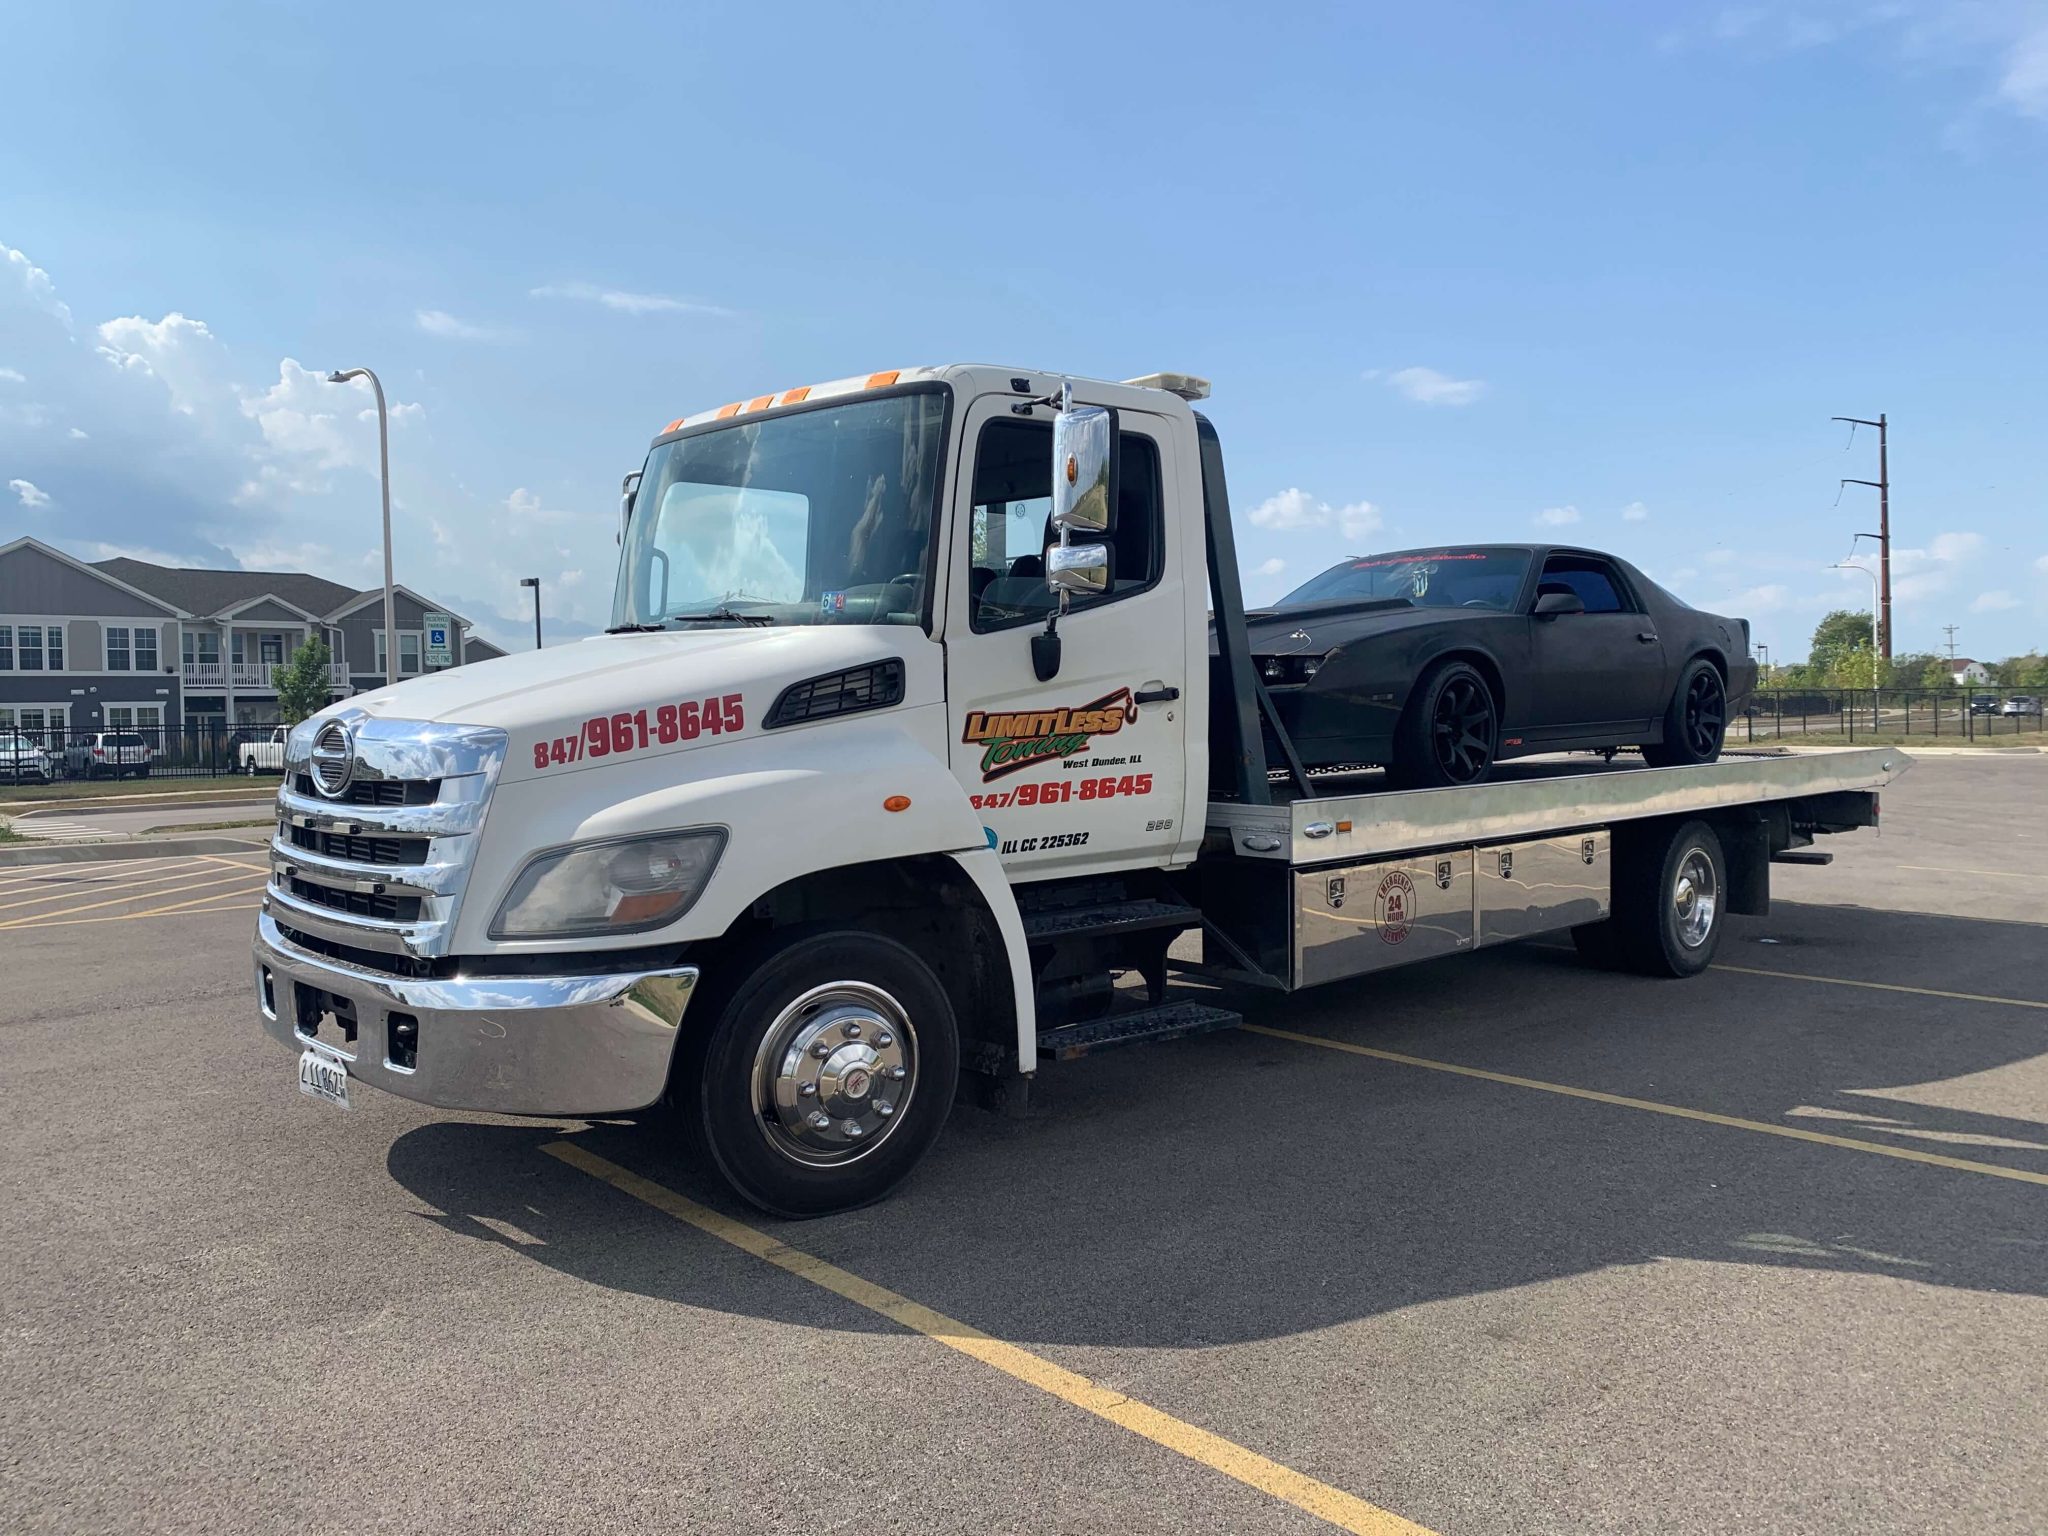 Palatine IL Towing Service - Limitless Towing